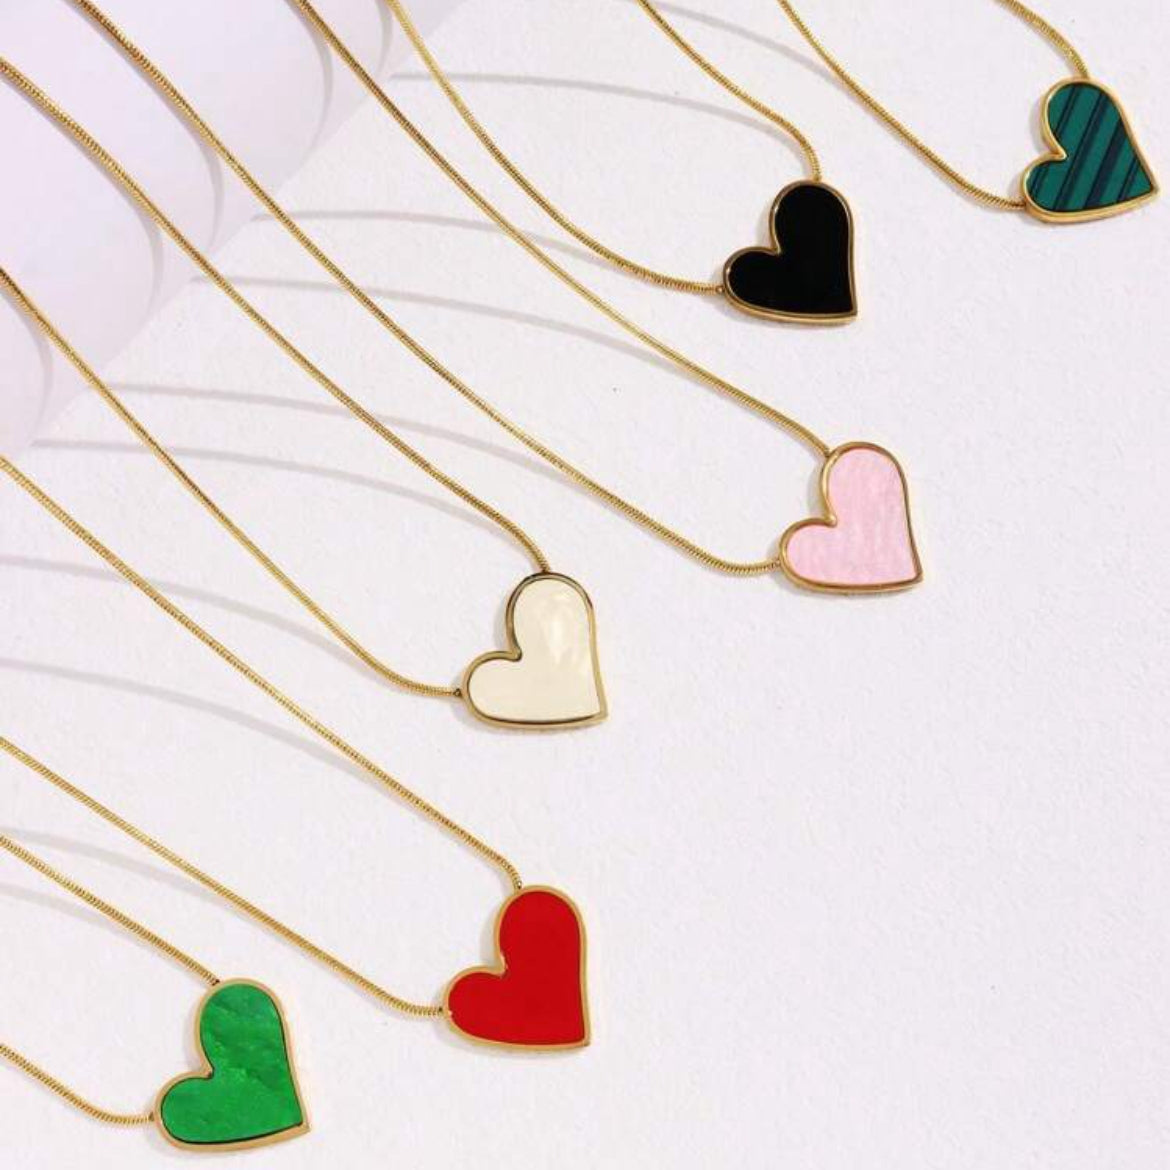 Stainless Steel Heart Shape Pendant Necklace